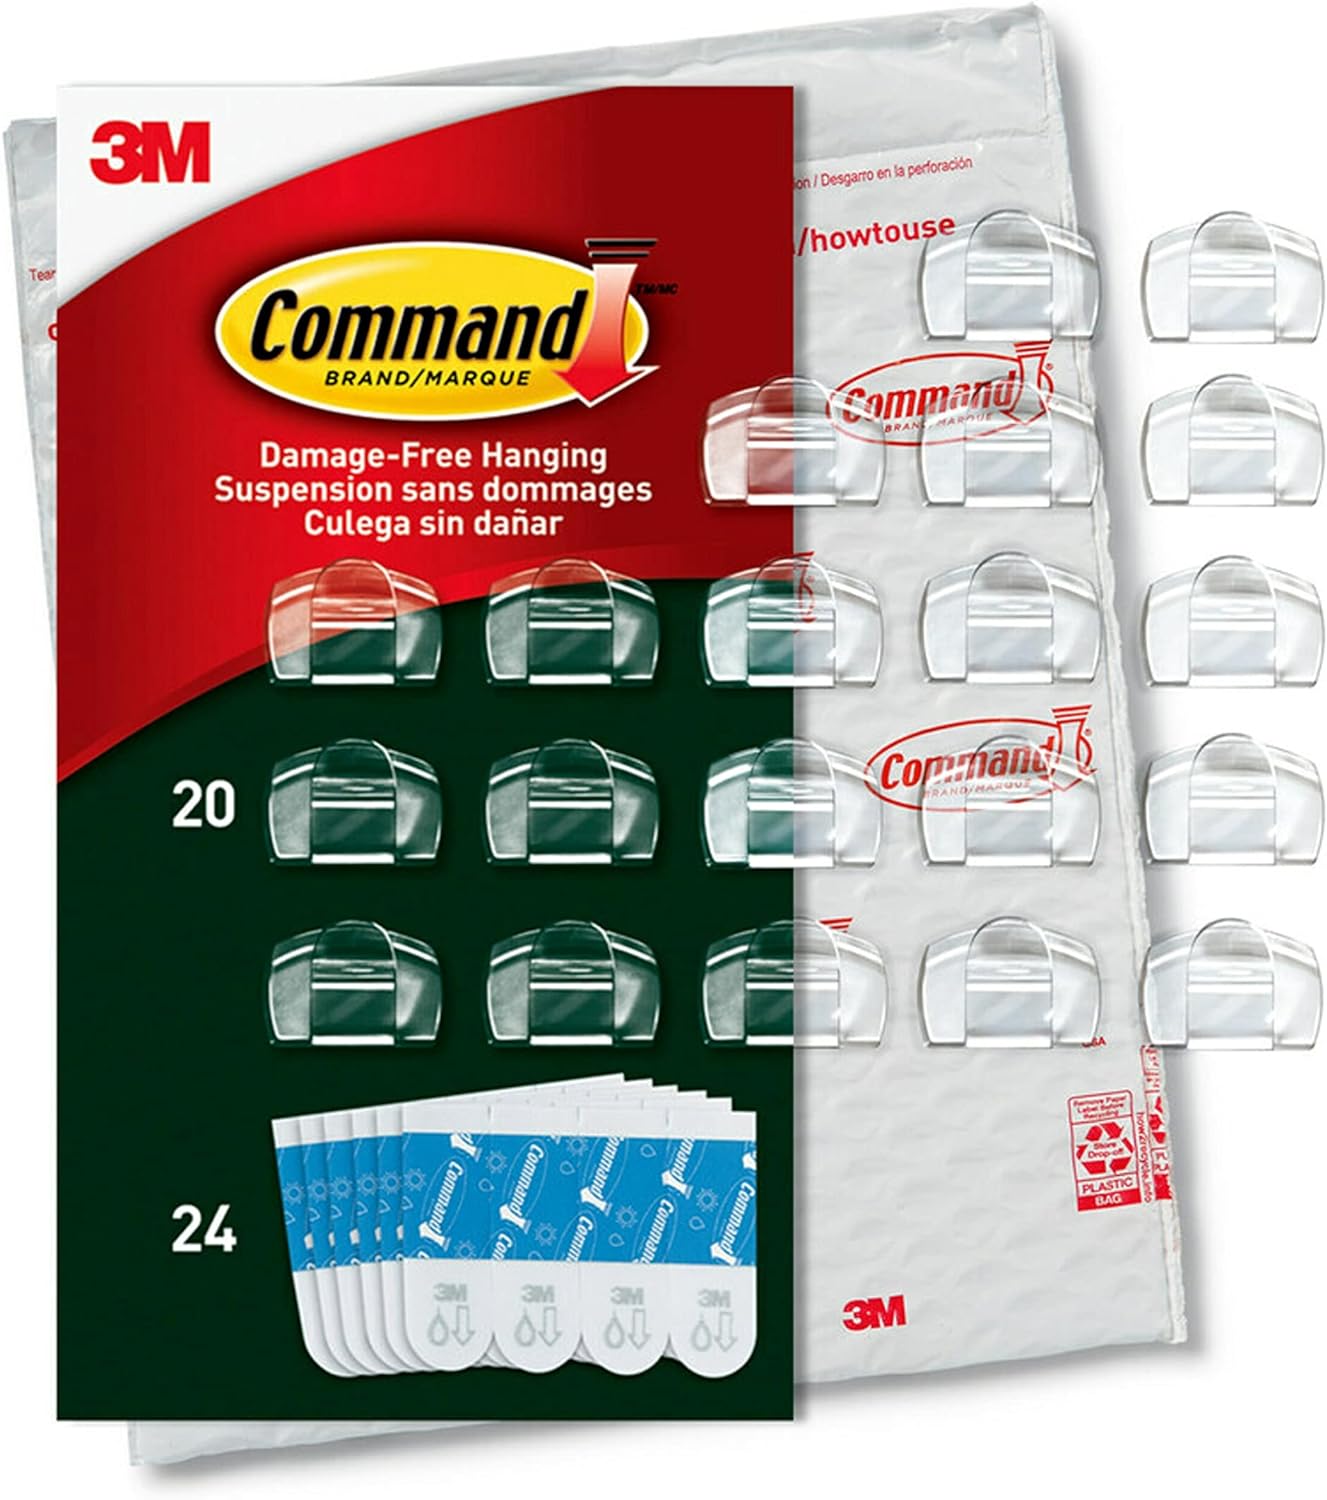 3M AW017-20NA Command Outdoor Light Clips, Damage Free Hanging Light Clips  with Adhesive Strips, Wall Clips for Hanging Outdoor Christmas Dec